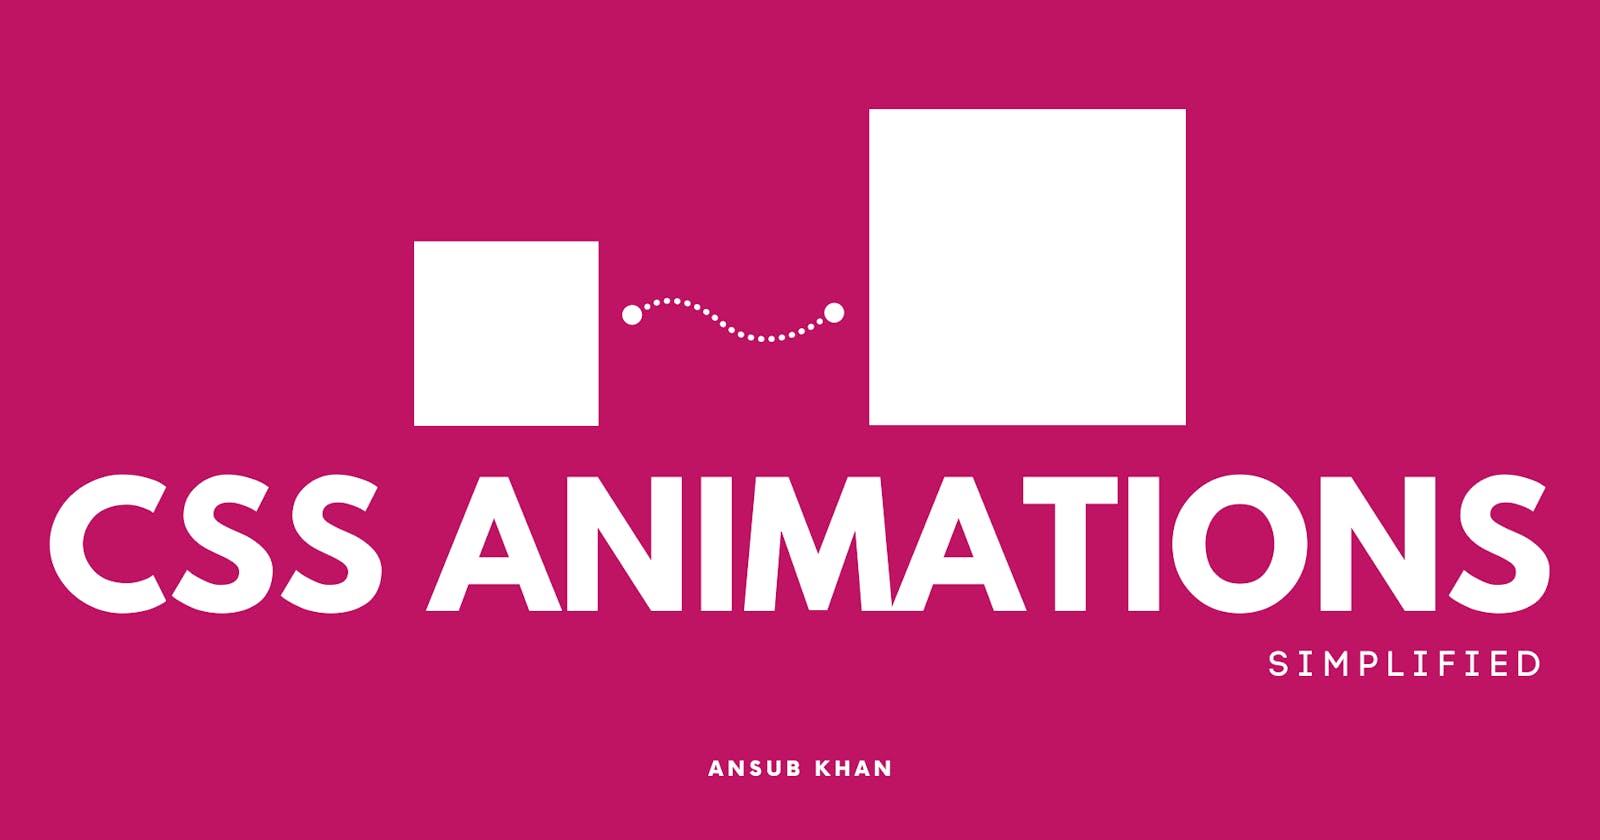 CSS Animation Simplified!